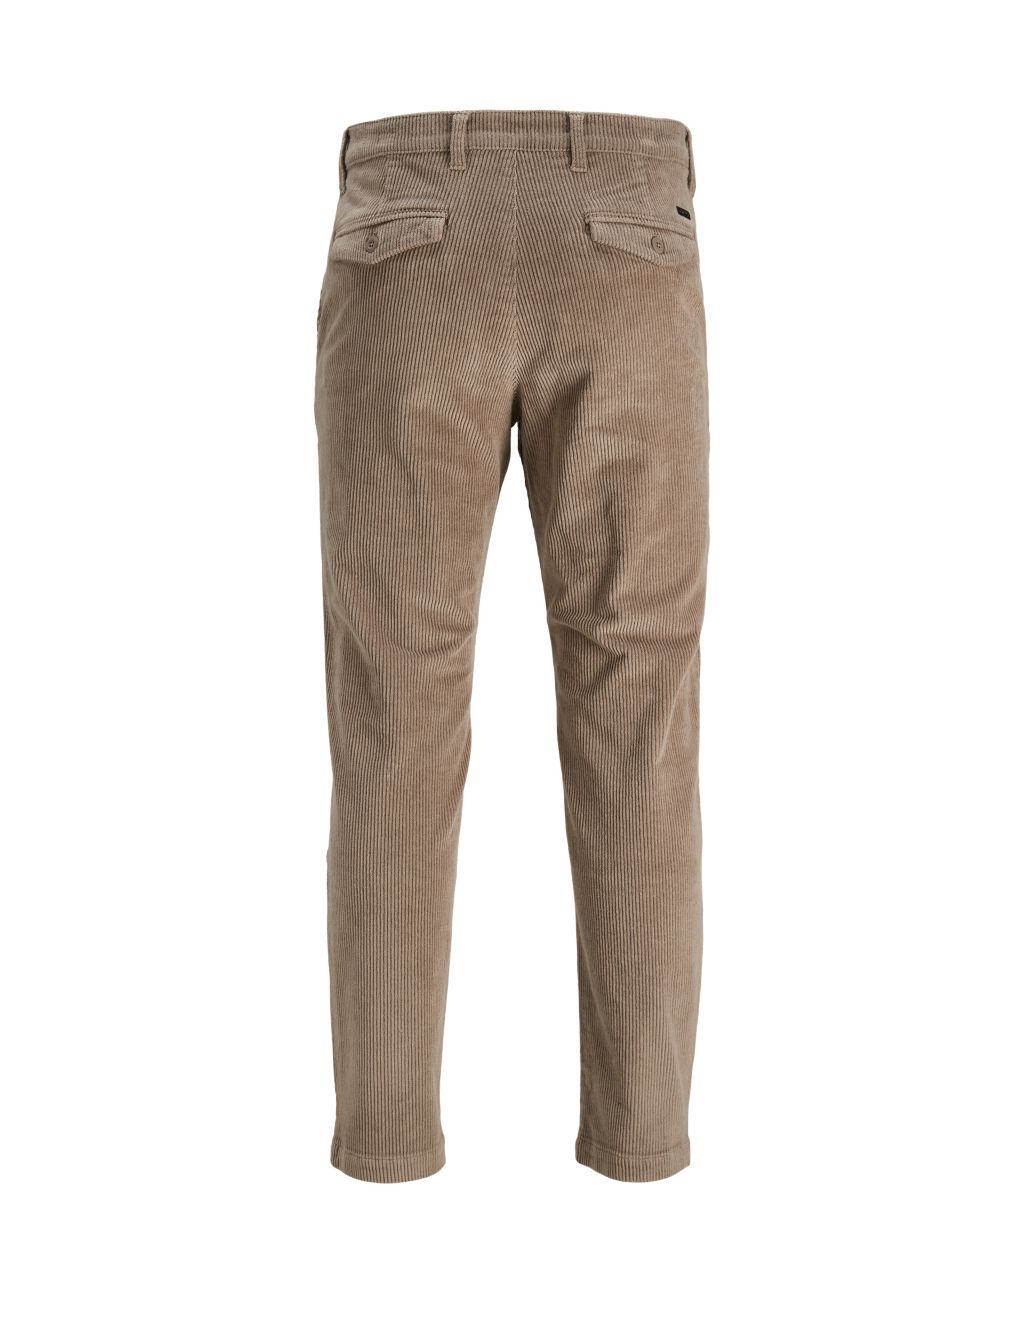 Tapered Fit Corduroy Chinos image 8